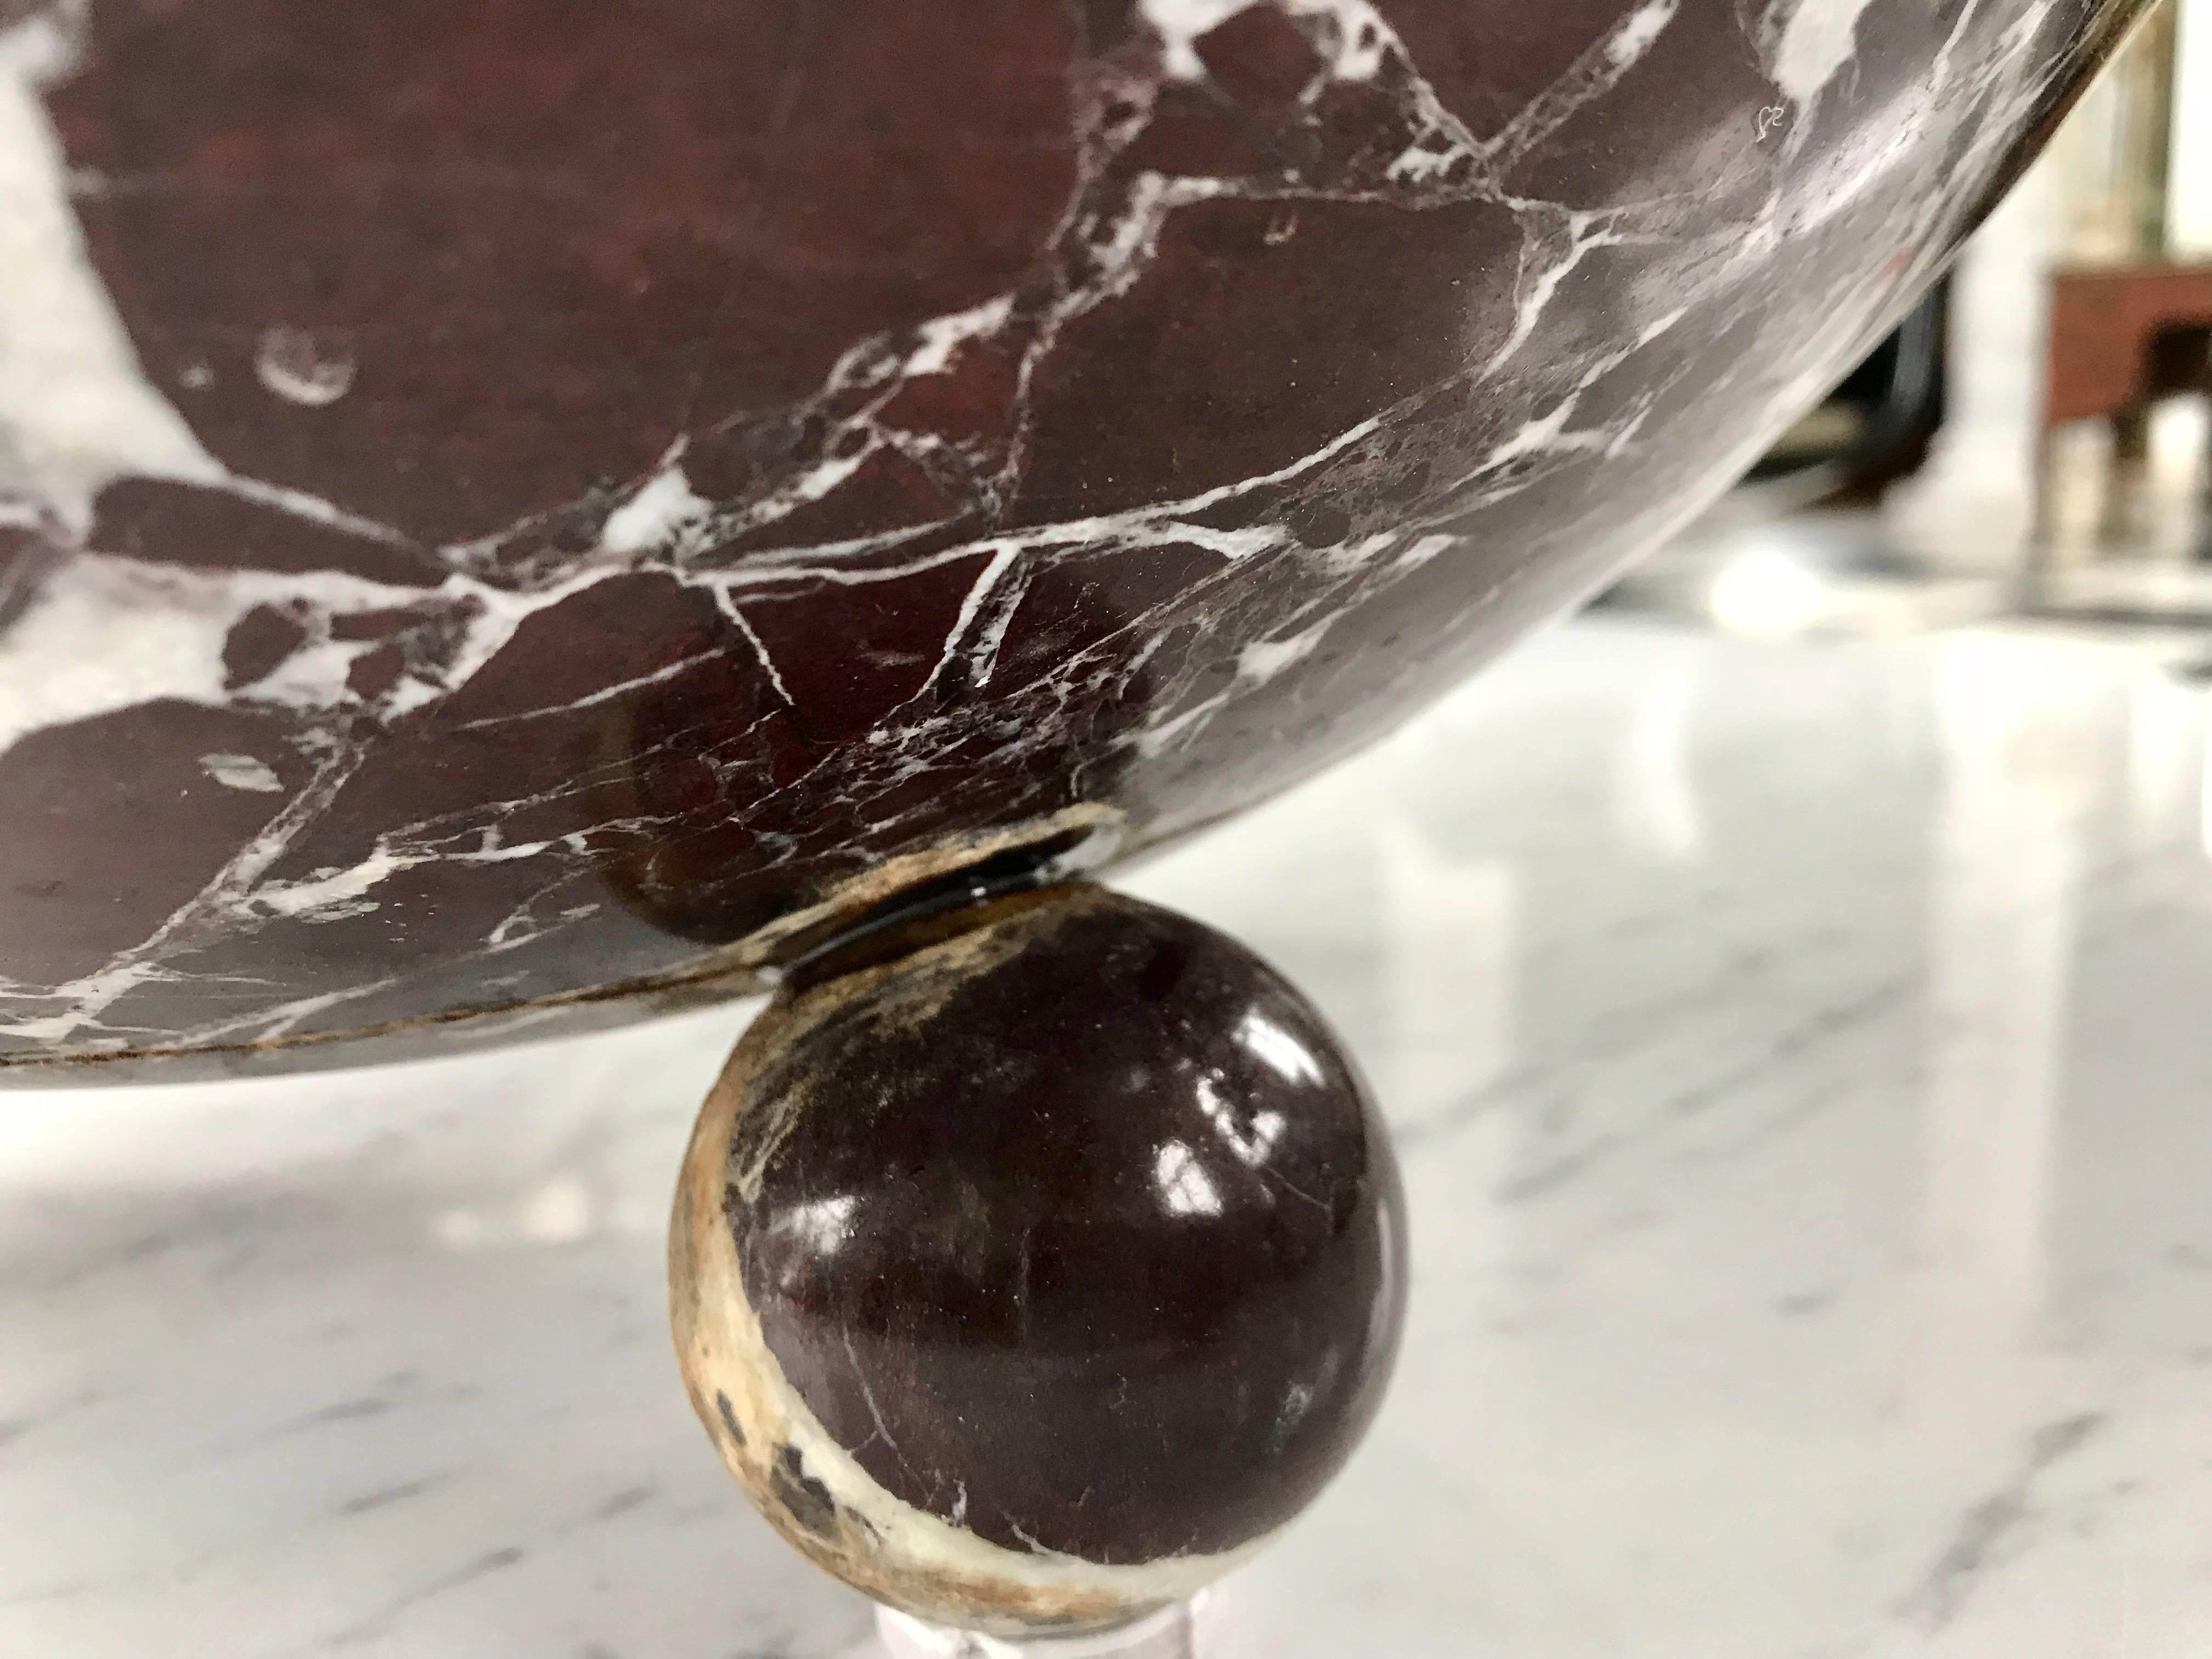 This gorgeous centrepiece bowl is carved out of the rare Rossa Levanto Marble. The simple Art Deco style bowl is supported by three spheres. We have two of them in case you need a pair.